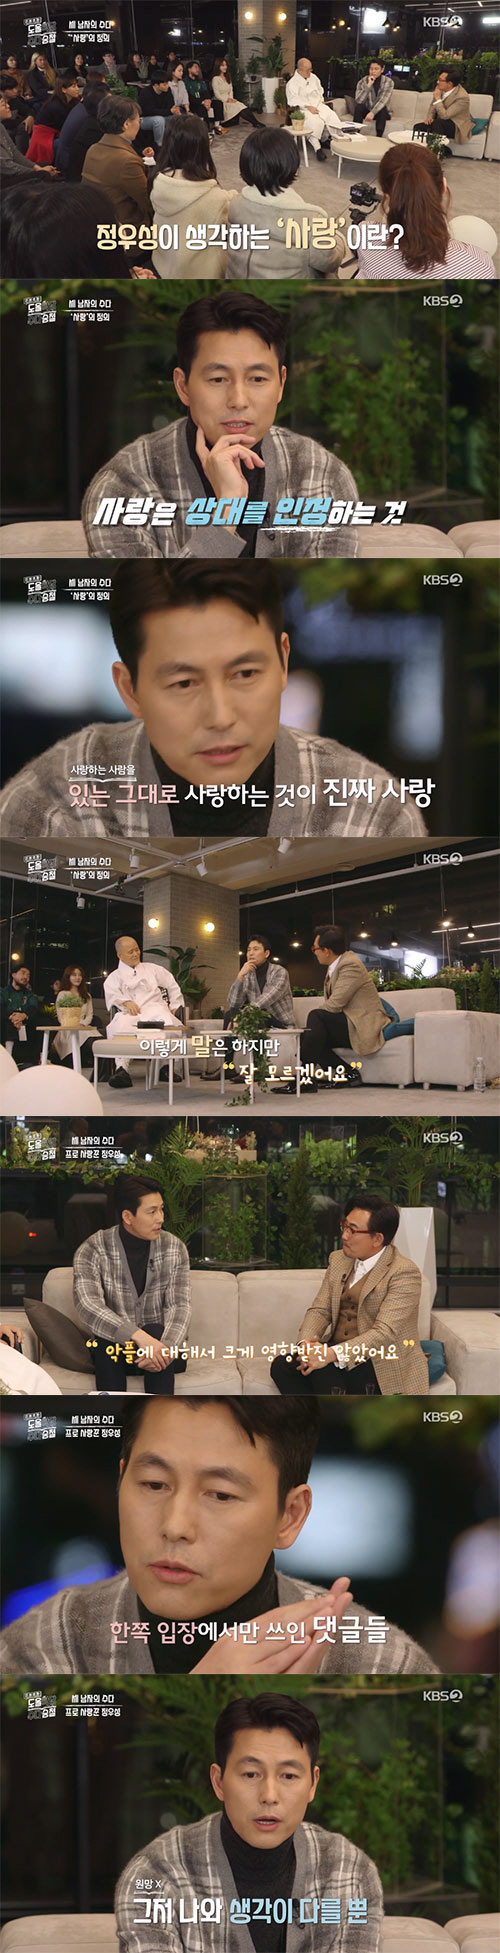 Actor Jung Woo-sung Confessions a Story of LoveOn the 18th KBS 2TV King Sejong Institute Suh Seung Chul, the second time, the philosopher Dool Kim Yong-ok and singer Lee Seung-cheol, and the actor Jung Woo-sung shared their love stories with each other.On this day, Jung Woo-sung introduced Todays theme is love, and Lee Seung-cheol asked Kim Yong-ok, Is not it foamy because the actor introduces it?Lee Seung-cheol asked Jung Woo-sung, Are you having a good love? Jung Woo-sung said, You should always do the tombs. Lee Seung-cheol said, I think there is something to avoid the answer.Lee Seung-cheol also said, I was invited to Mr. Dools house.But there was a huge amount of books in the house, he said, and Door said, There will be hundreds of thousands of books. Lee Seung-cheol said, The unique thing was that the toilet toilet was facing each other, and Door surprised everyone by saying, I sit down and talk because I spend about 30 minutes watching a big thing.Kim Yong-ok talked about love affection in Confucianism.Kim Yong-ok said, The child in Confucianism is caught; she cares about her wife; thats love, attracting Eye-catching.Kim Yong-ok said, The lyrics of Lee Seung-cheol are all love.However, the love of each song is different, he said, embarrassed Lee Seung-cheol, and Lee Seung-cheol laughed, saying, I do not write all the songs. Lee Seung-cheol asked Jung Woo-sung, Have you ever been kicked by a woman? and Jung Woo-sung said, Of course it is. Its a court story.I did not have enough material, so I always ate it. I also lived a model life, but it was not easy. Kim Yong-ok and Lee Seung-cheol were talking about love history and talked with the consensus that their wives were two years old.Lee Seung-cheol said, Jung Woo-sung also talked about it.At this time, Jung Woo-sung laughed at me, saying, Why do you put me in the love affair of two people? I tried to go out for a while.Lee Seung-cheol told Jung Woo-sung, Did not you have a public relationship?Wasnt it romantic for a woman friend?, Jung Woo-sung said, Its the job of Friend, the most uncomfortable man in the world. I could not have a routine date.It was a face that the whole nation knew. It was a free man. It was a useless and funny man Friend. Lee Seung-cheol said, When I saw Jung Woo-sung, it seems to be love like eros rather than agape love.I do not have a famous work, and Jung Woo-sung immediately told me that if you drink this, you will be dating. Jung Woo-sung said, When I was part-time at a hamburger shop, there were many graffiti called Jung Woo-sung in the alley to the bathroom.Jung Woo-sung said, I have not been in a lot of love. I also had no time to be in charge.So I did not say, Lets go to eat this. He mentioned when he was less confident.On the definition of love, Jung Woo-sung said, If you define love as a human being, love is to acknowledge your opponent.I say that it gives a sense of distance as much as I love, but I do not know. During the later debate, Dool Kim Yong-ok received the attention of everyone in the studio, saying that he chose to go out to love Siddhartha of India, who became a Buddha.Lee Seung-cheol, who listened to the explanation in detail, gave a serious exclamation and suddenly laughed at the Confessions, saying, I should go out.However, Lee Seung-cheol said, I have to think about it again.Jung Woo-sung heard Kim Yong-oks lecture and said, I often use the word love and seem to have been proud to know love well.After listening to the lecture, I learned the deep meaning of love again. In addition, as a result of his friendliest ambassador to the Refugee Organization, Jung Woo-sung said, The organization first contacted me; there was no reason to refuse; after the first mission, I became responsible.I also found out that the victims of the war were ordinary citizens. Especially, about the recent situation of receiving a bad comment about Refugee, It was not influenced by the bad thing.I just think its different from me. Lee Seung-cheol, who listened to this, said, I have also received a lot of evil.I sang a unified song on Dokdo with North Korean defectors, but I can not go because I do not have a visa in Japan. 